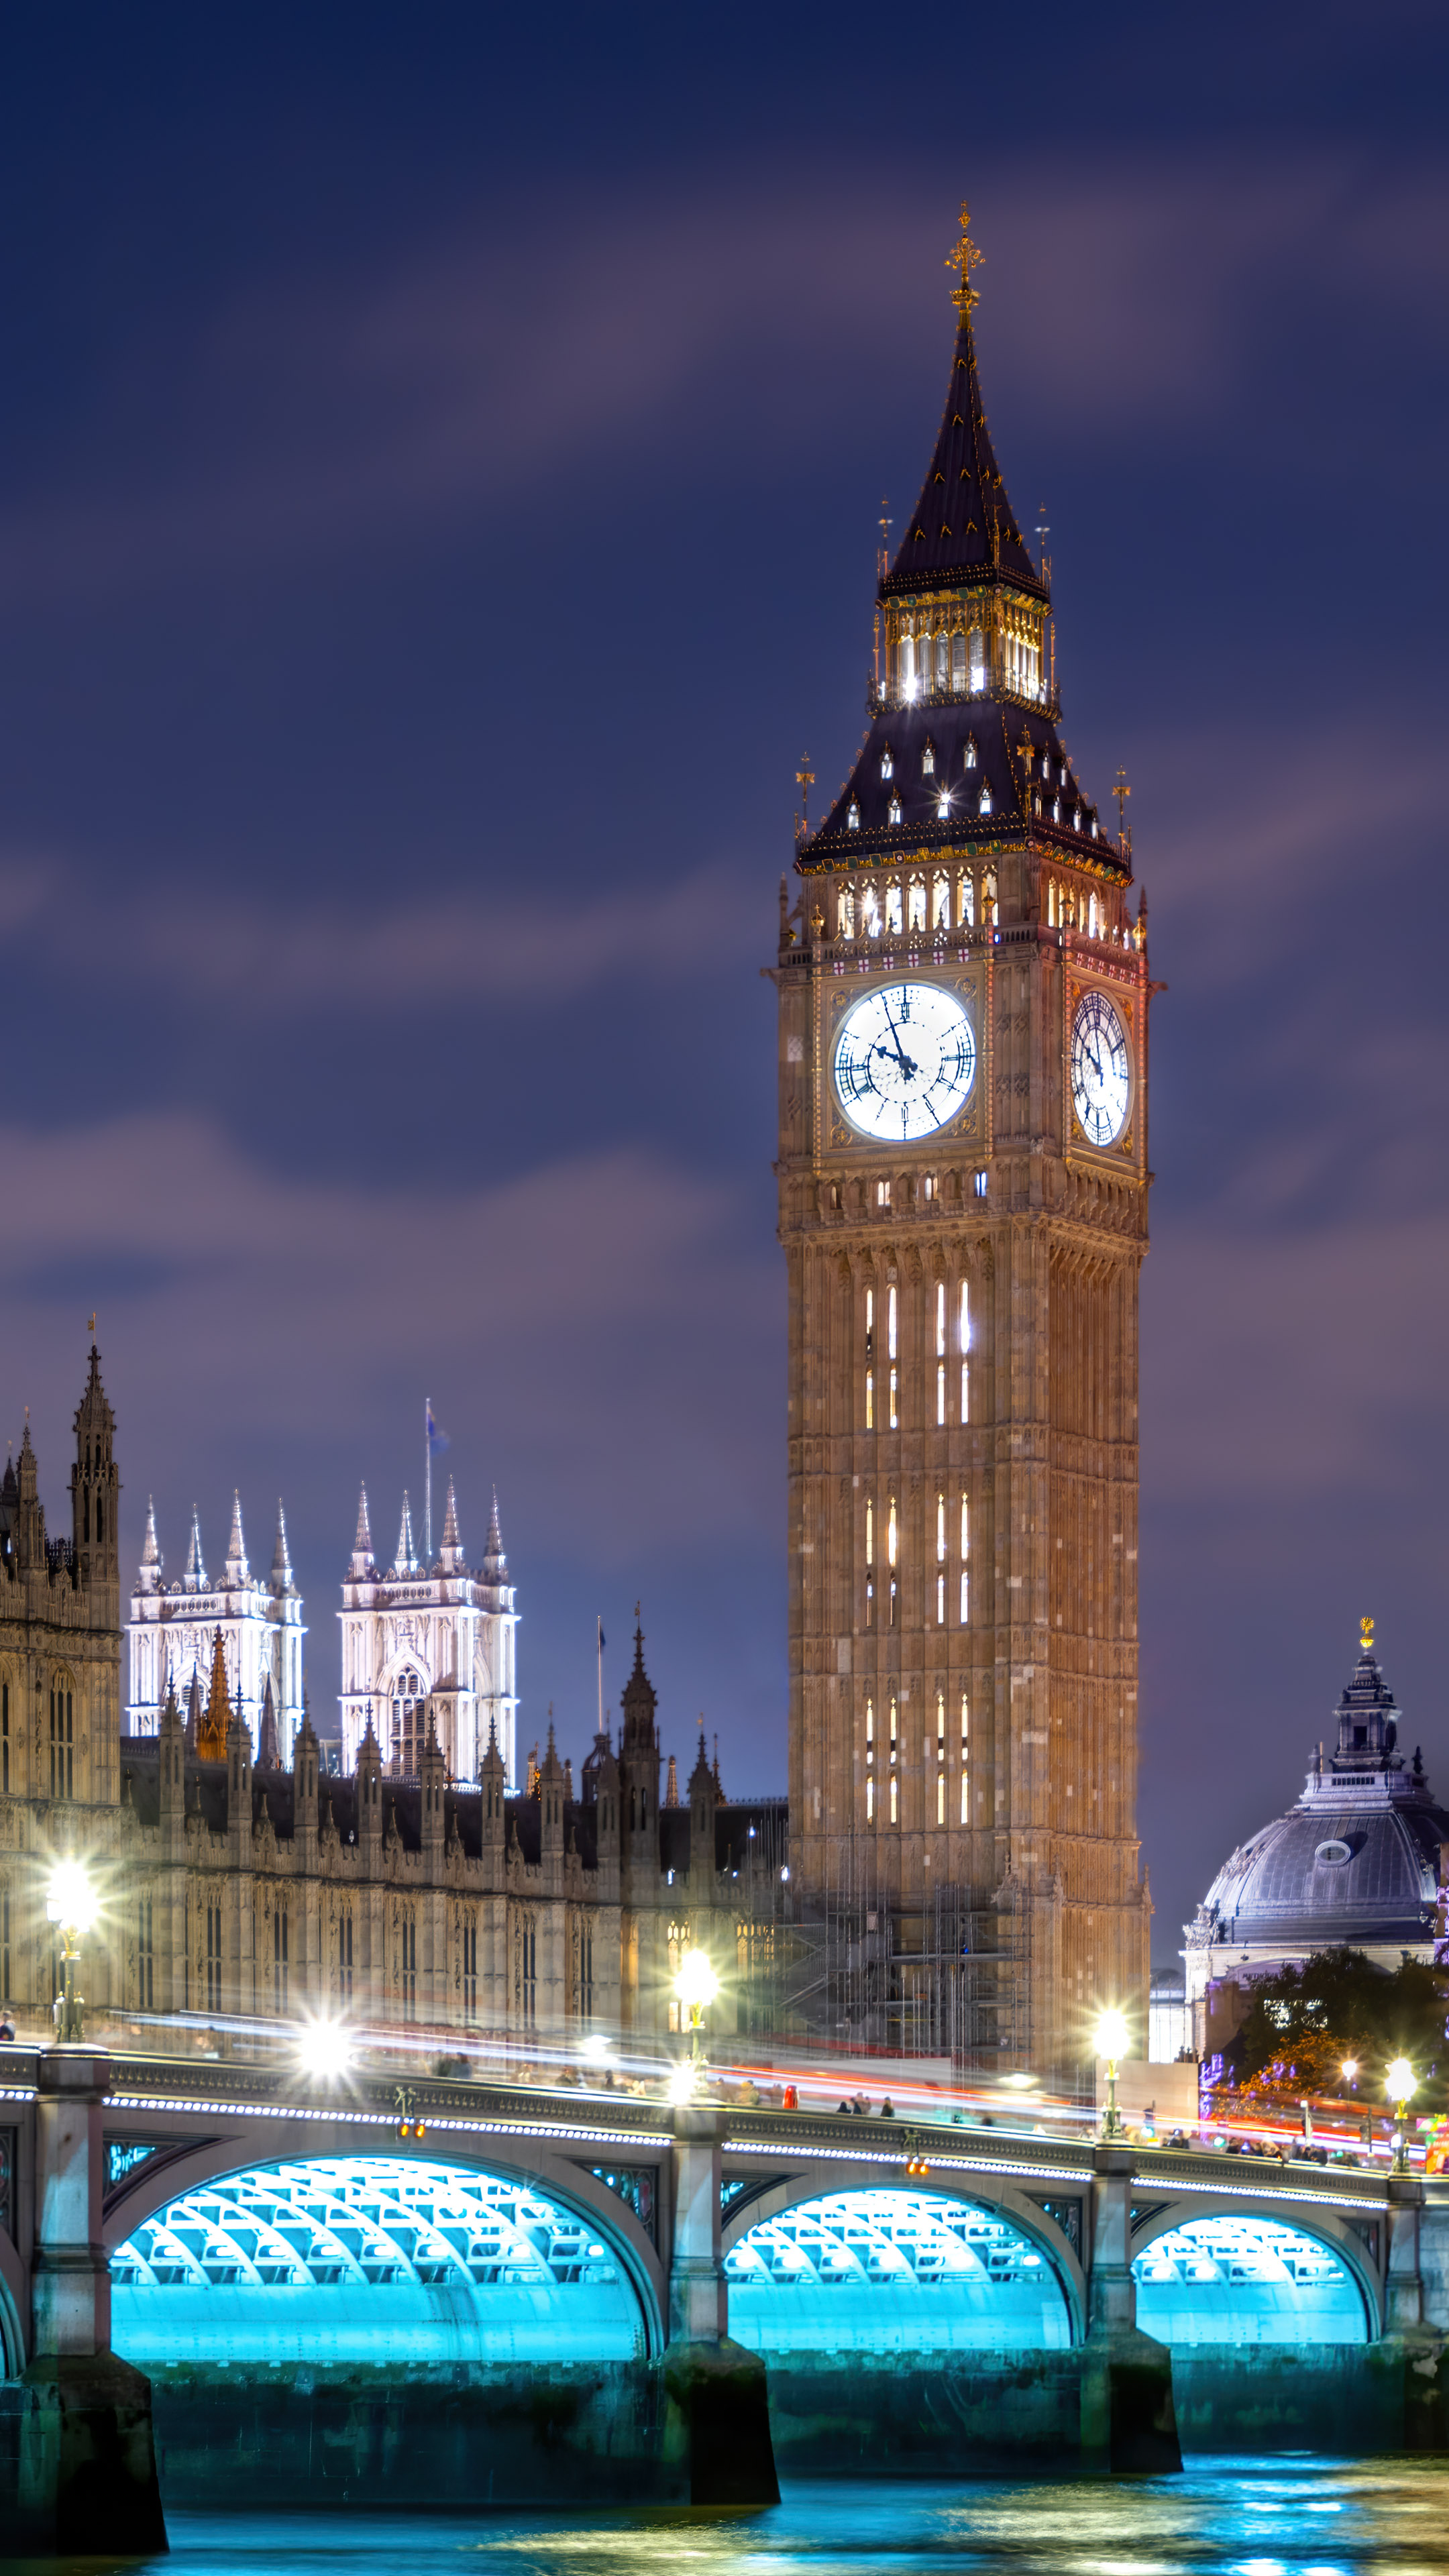 Enhance your mobile screen with the iconic beauty of London's Big Ben at night through our captivating wallpaper.